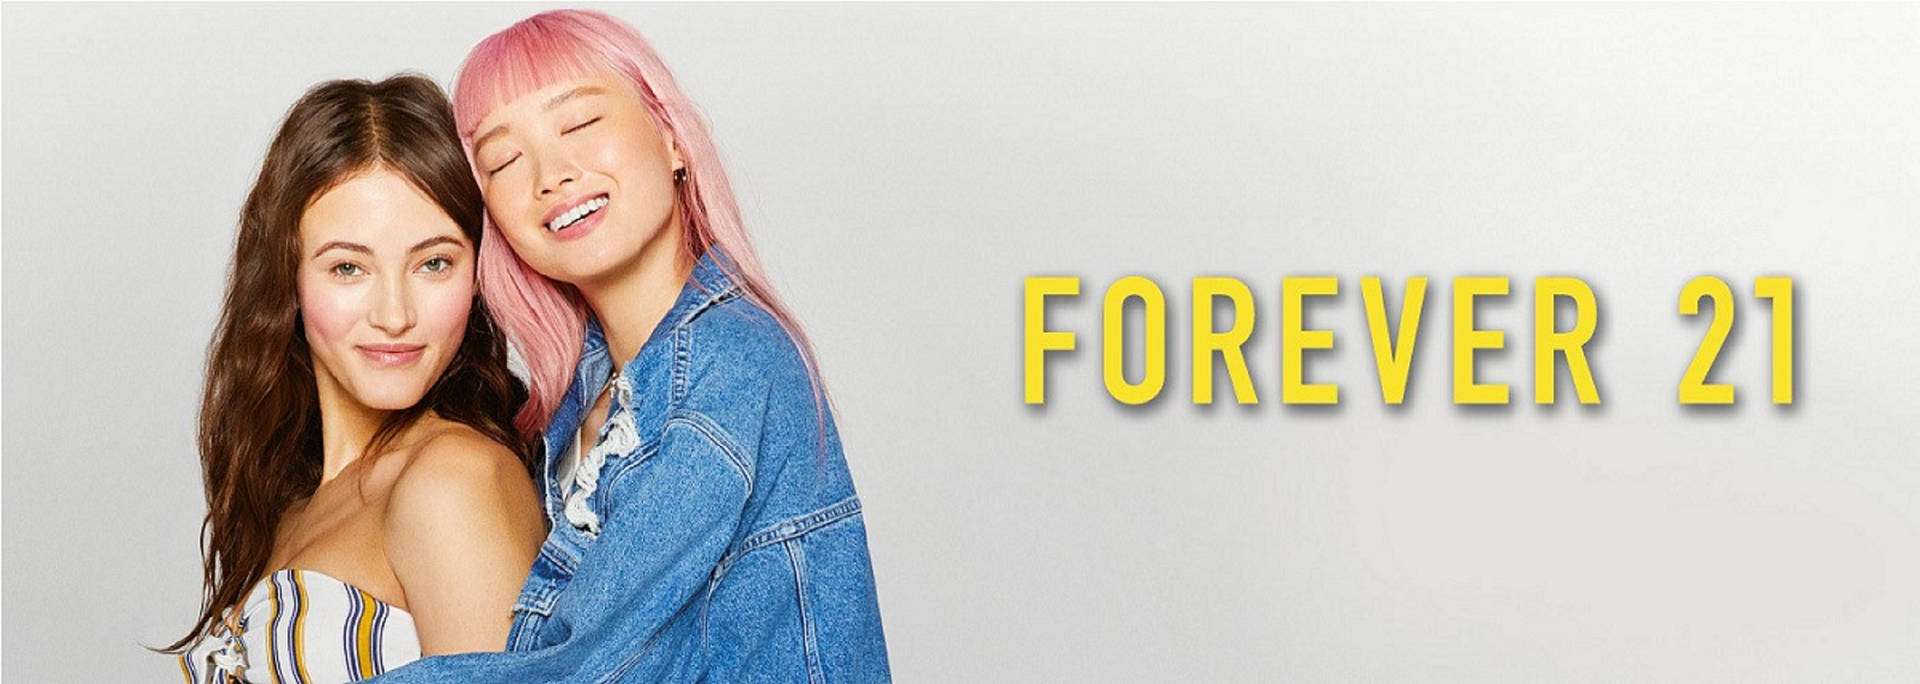 Widescreen Forever 21 Fashion Poster